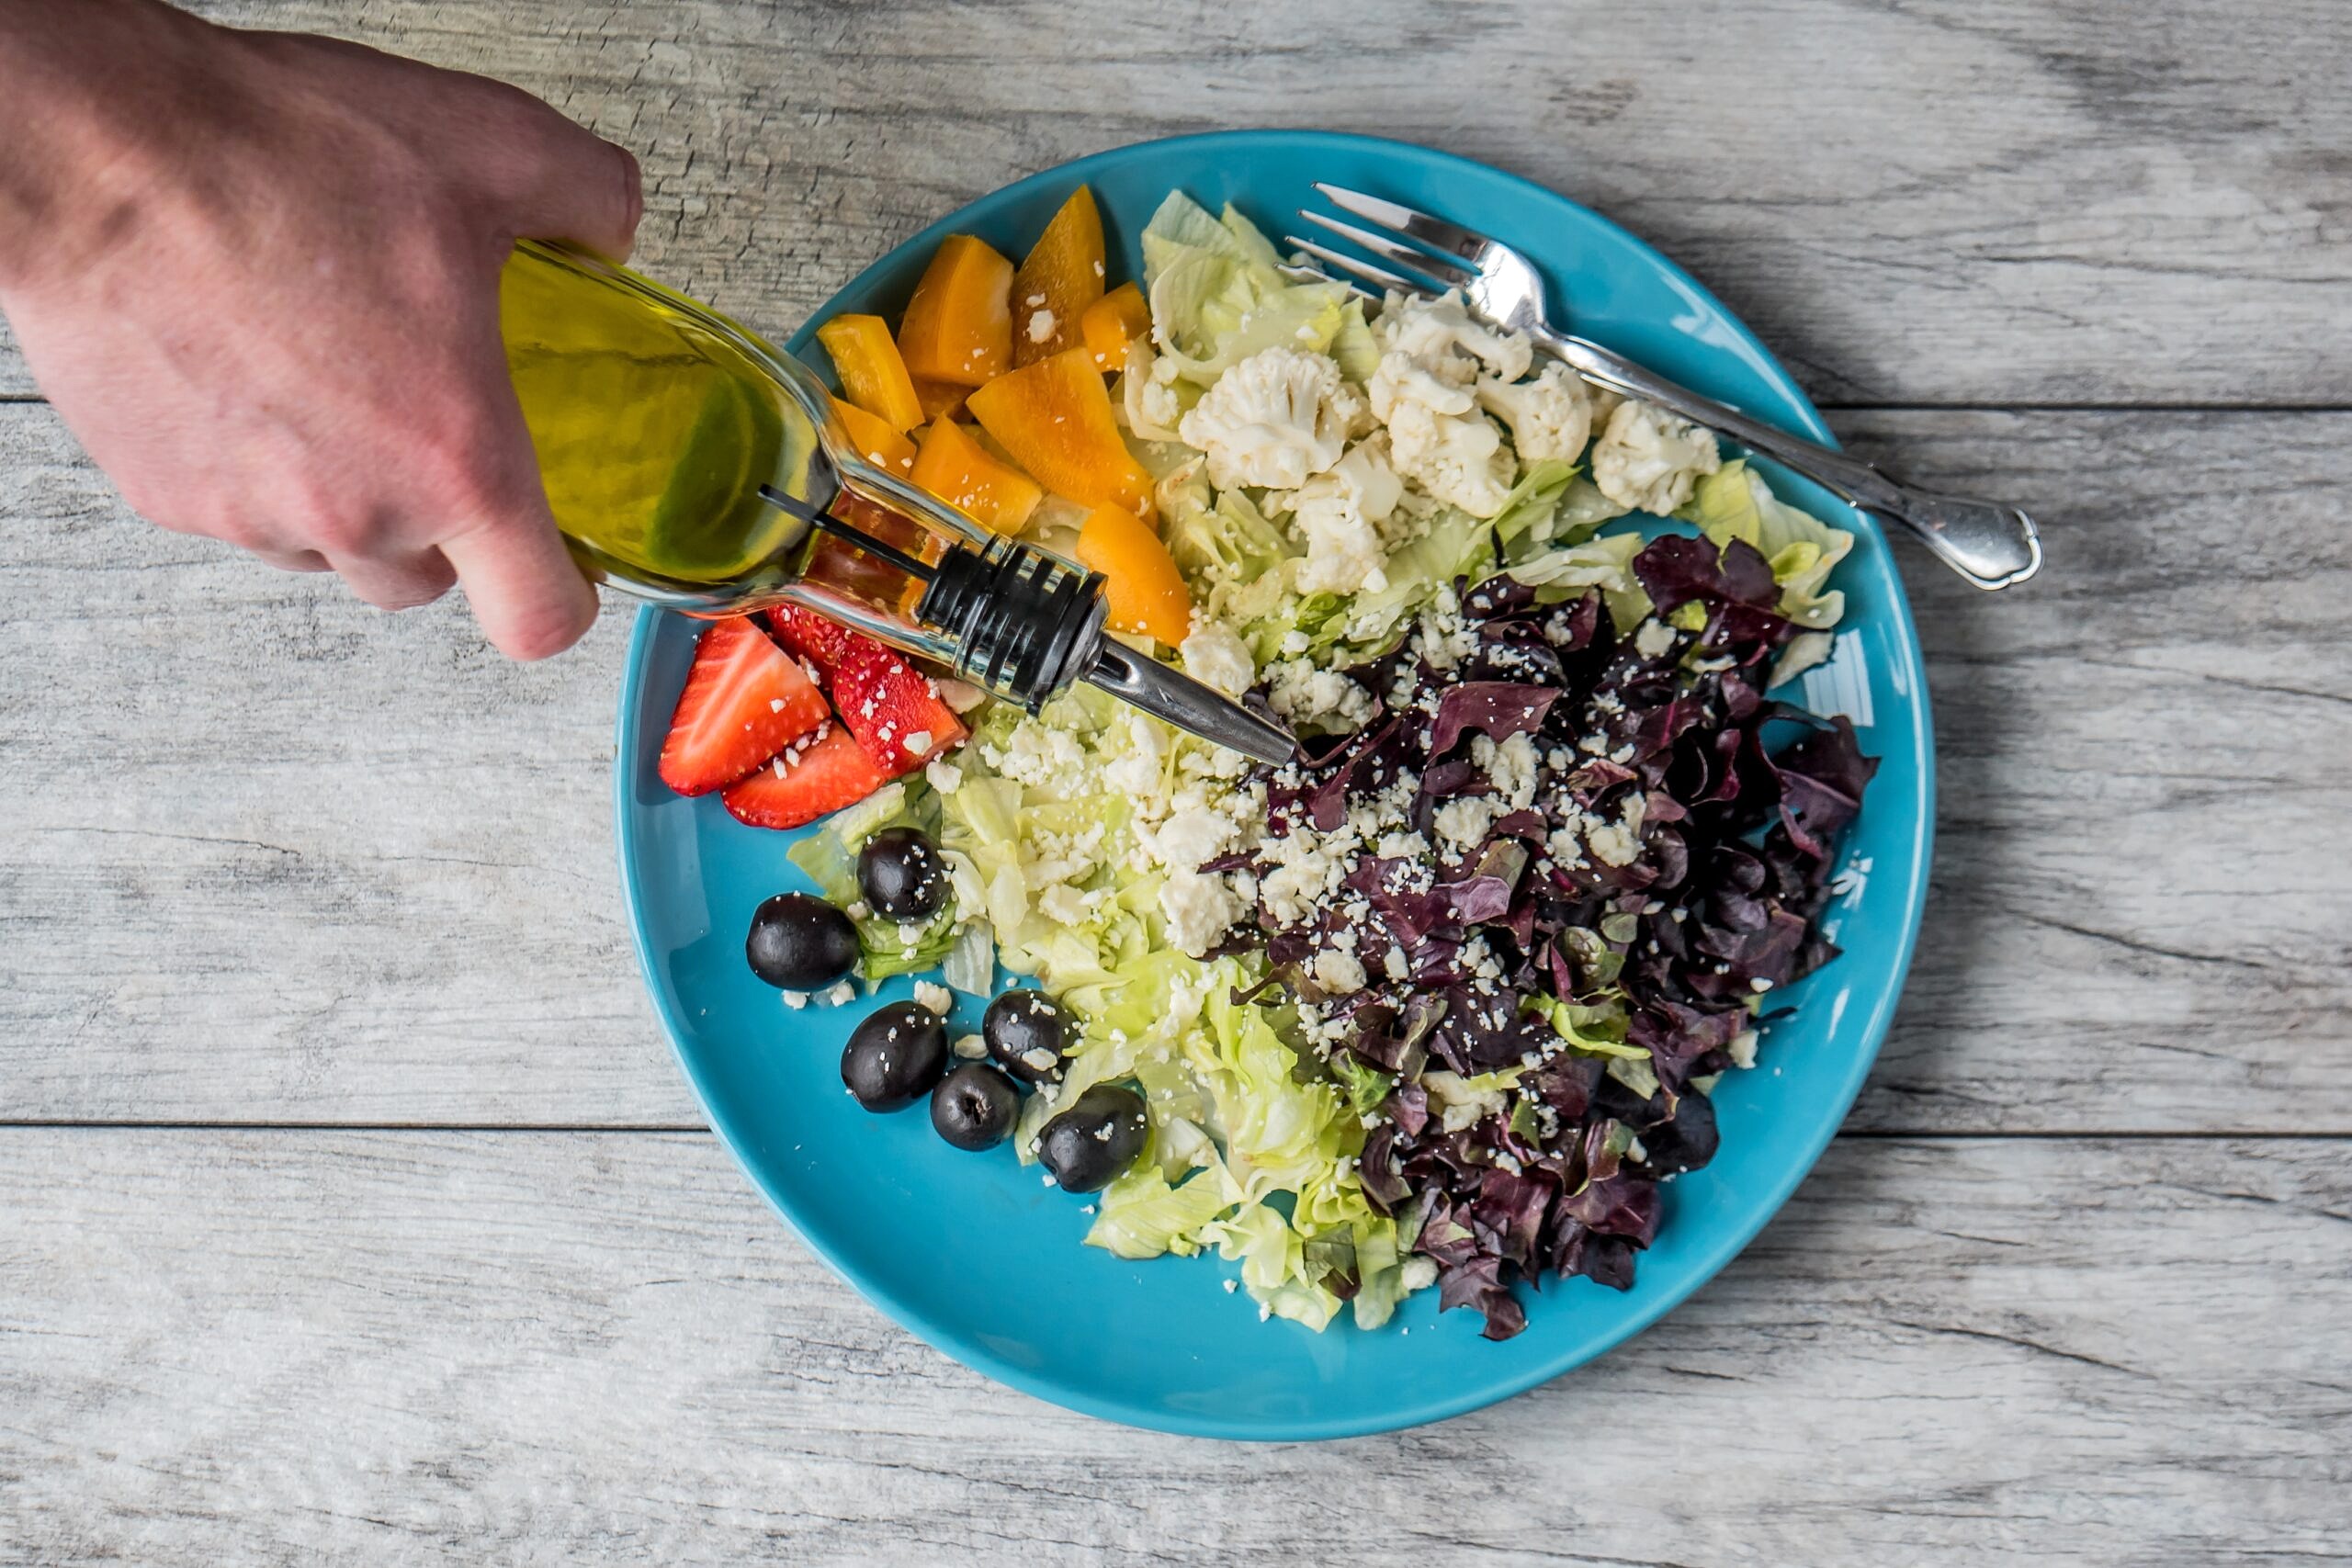 Olive oil being poured on a salad with cheese and olives to help gain weight.